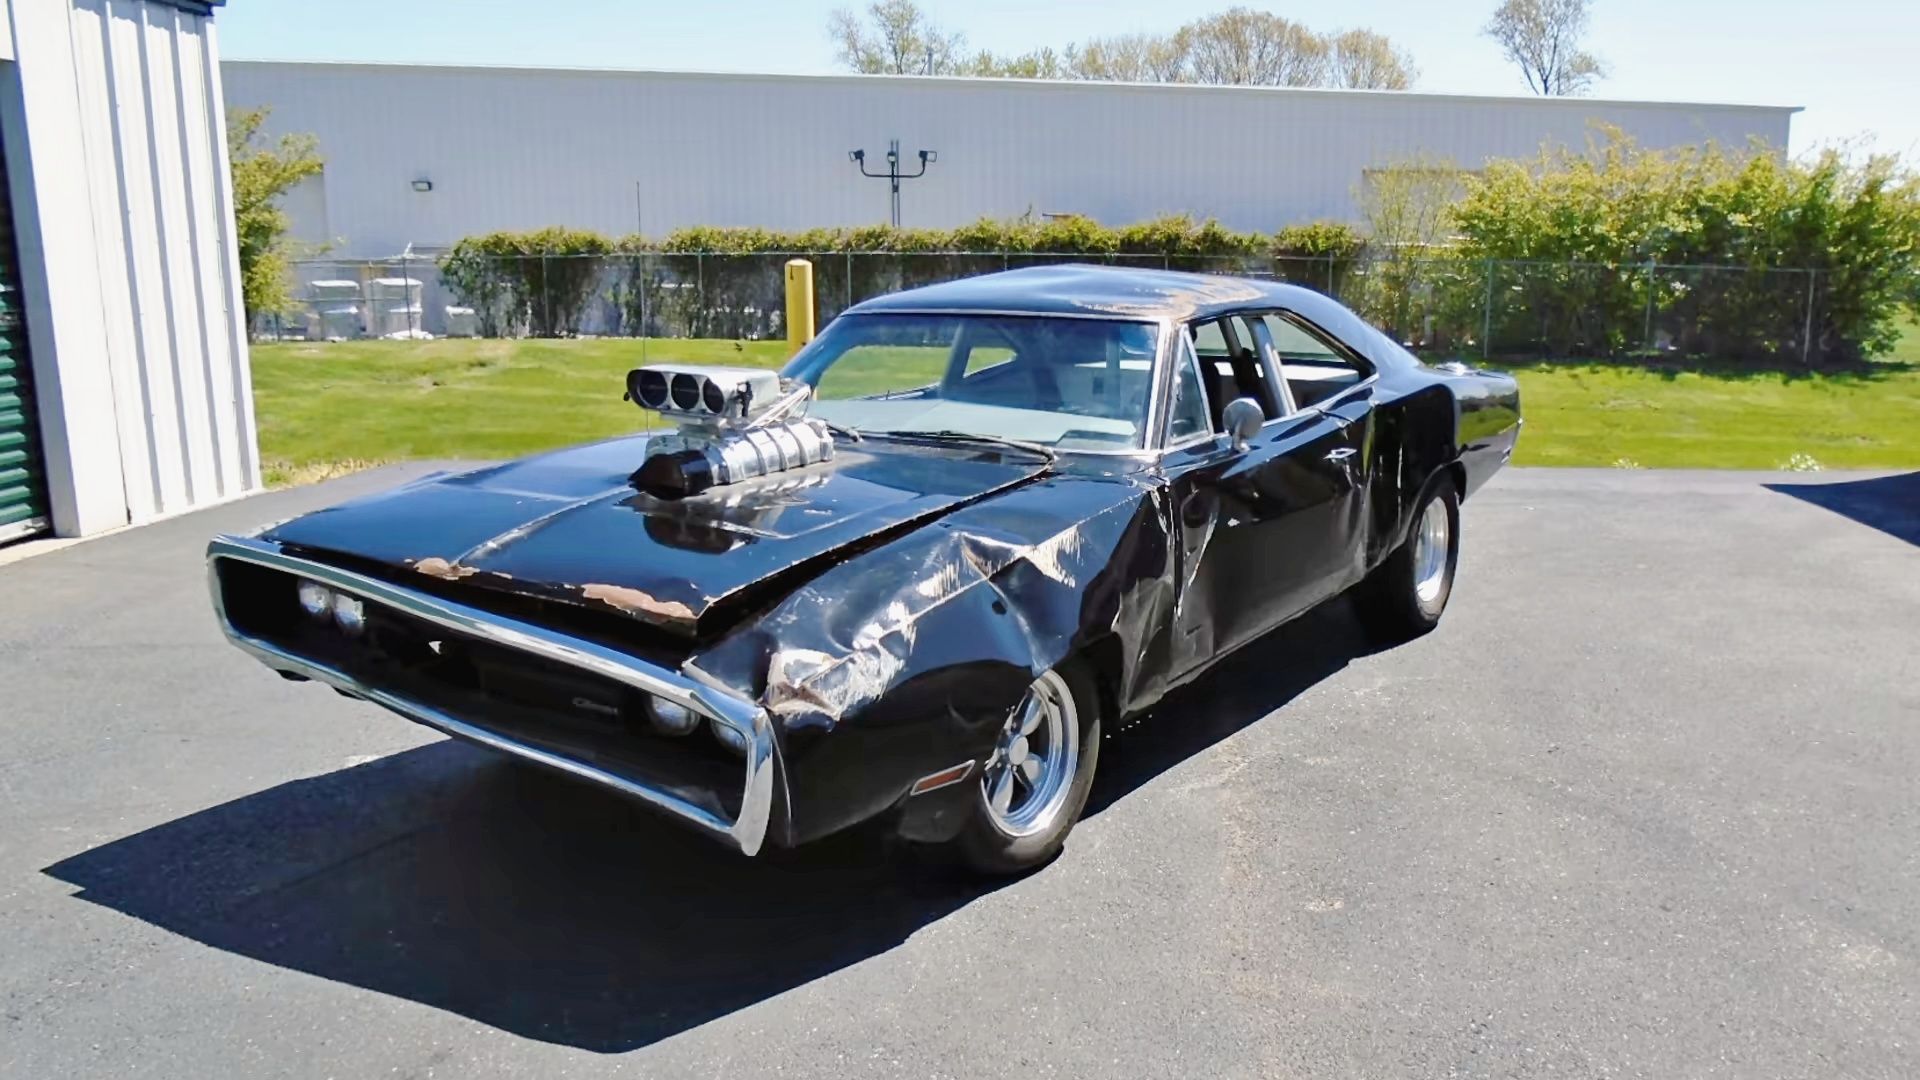 How a Fast & Furious Dodge Charger replica led to the real deal